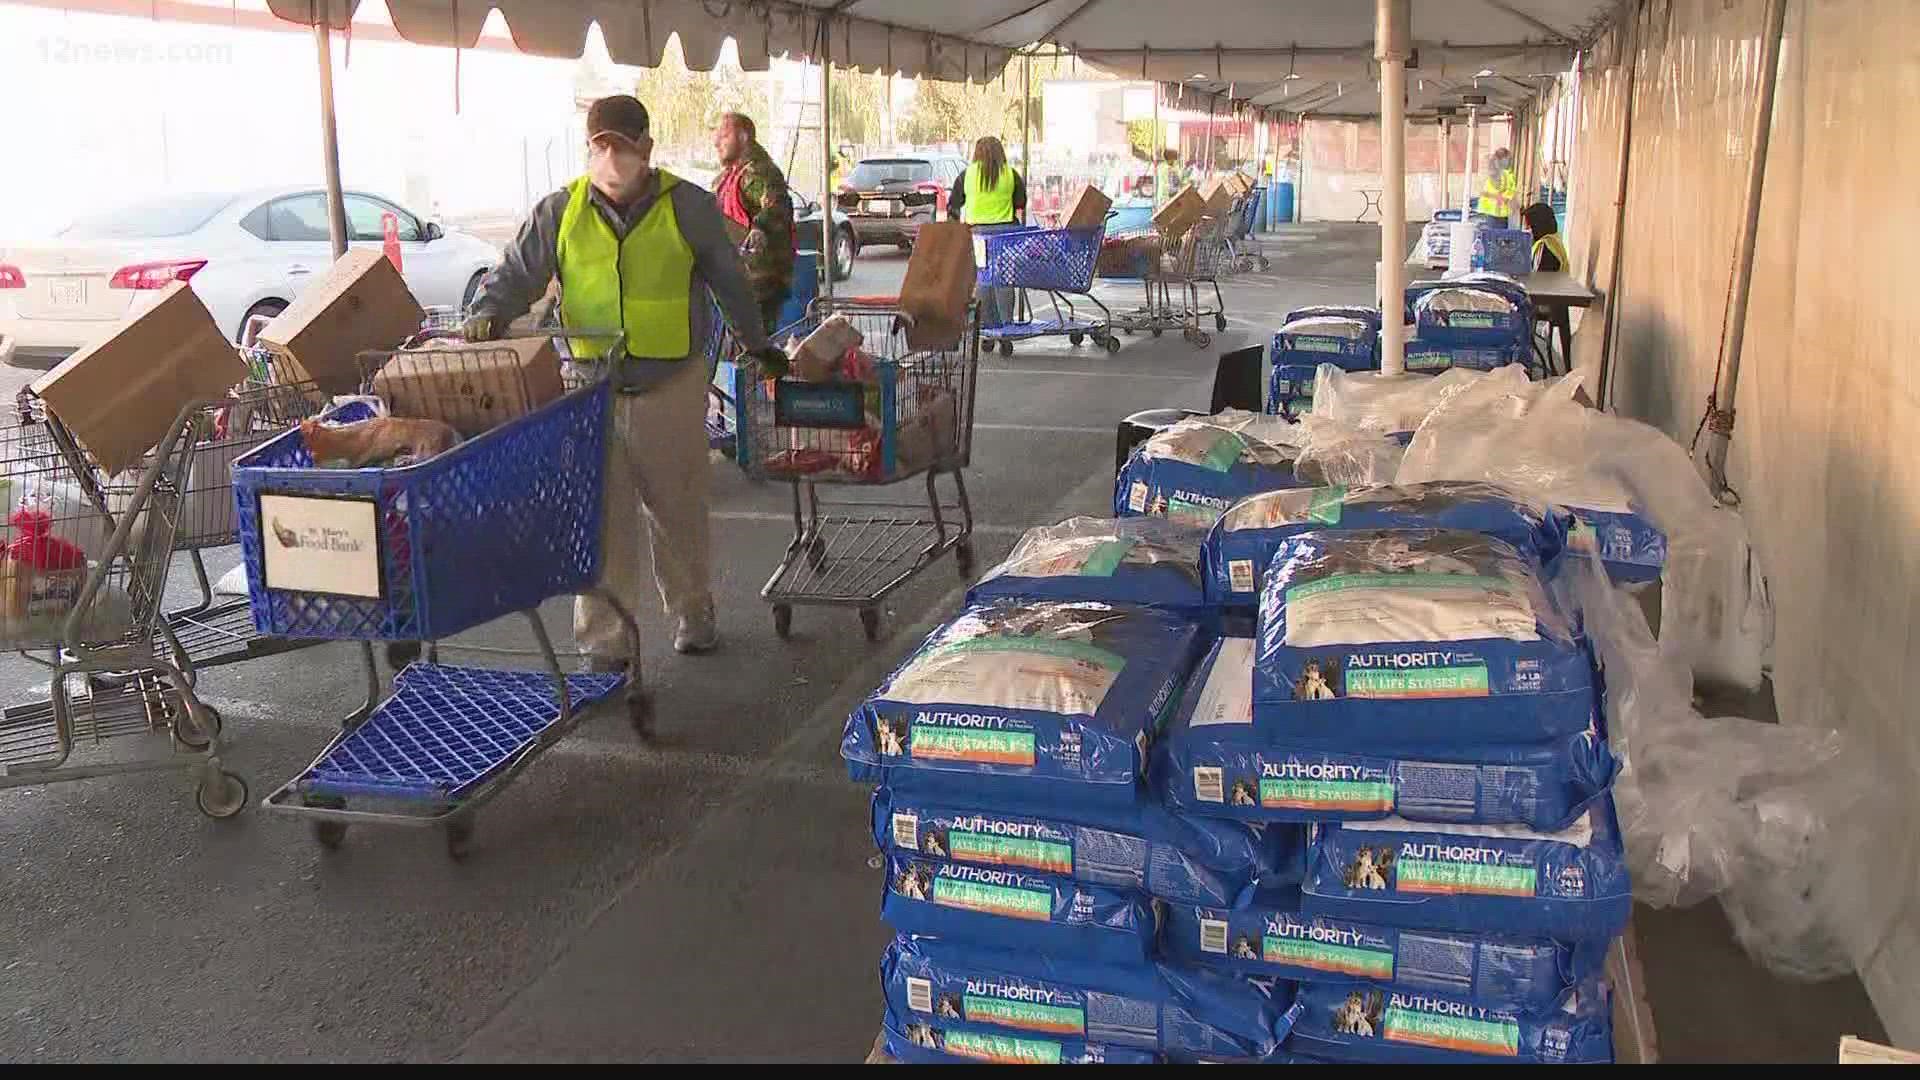 St. Mary's Food Bank is adding dog and cat food to help families feed their four-legged members. PetSmart donated the food in an effort to help pets get fed.